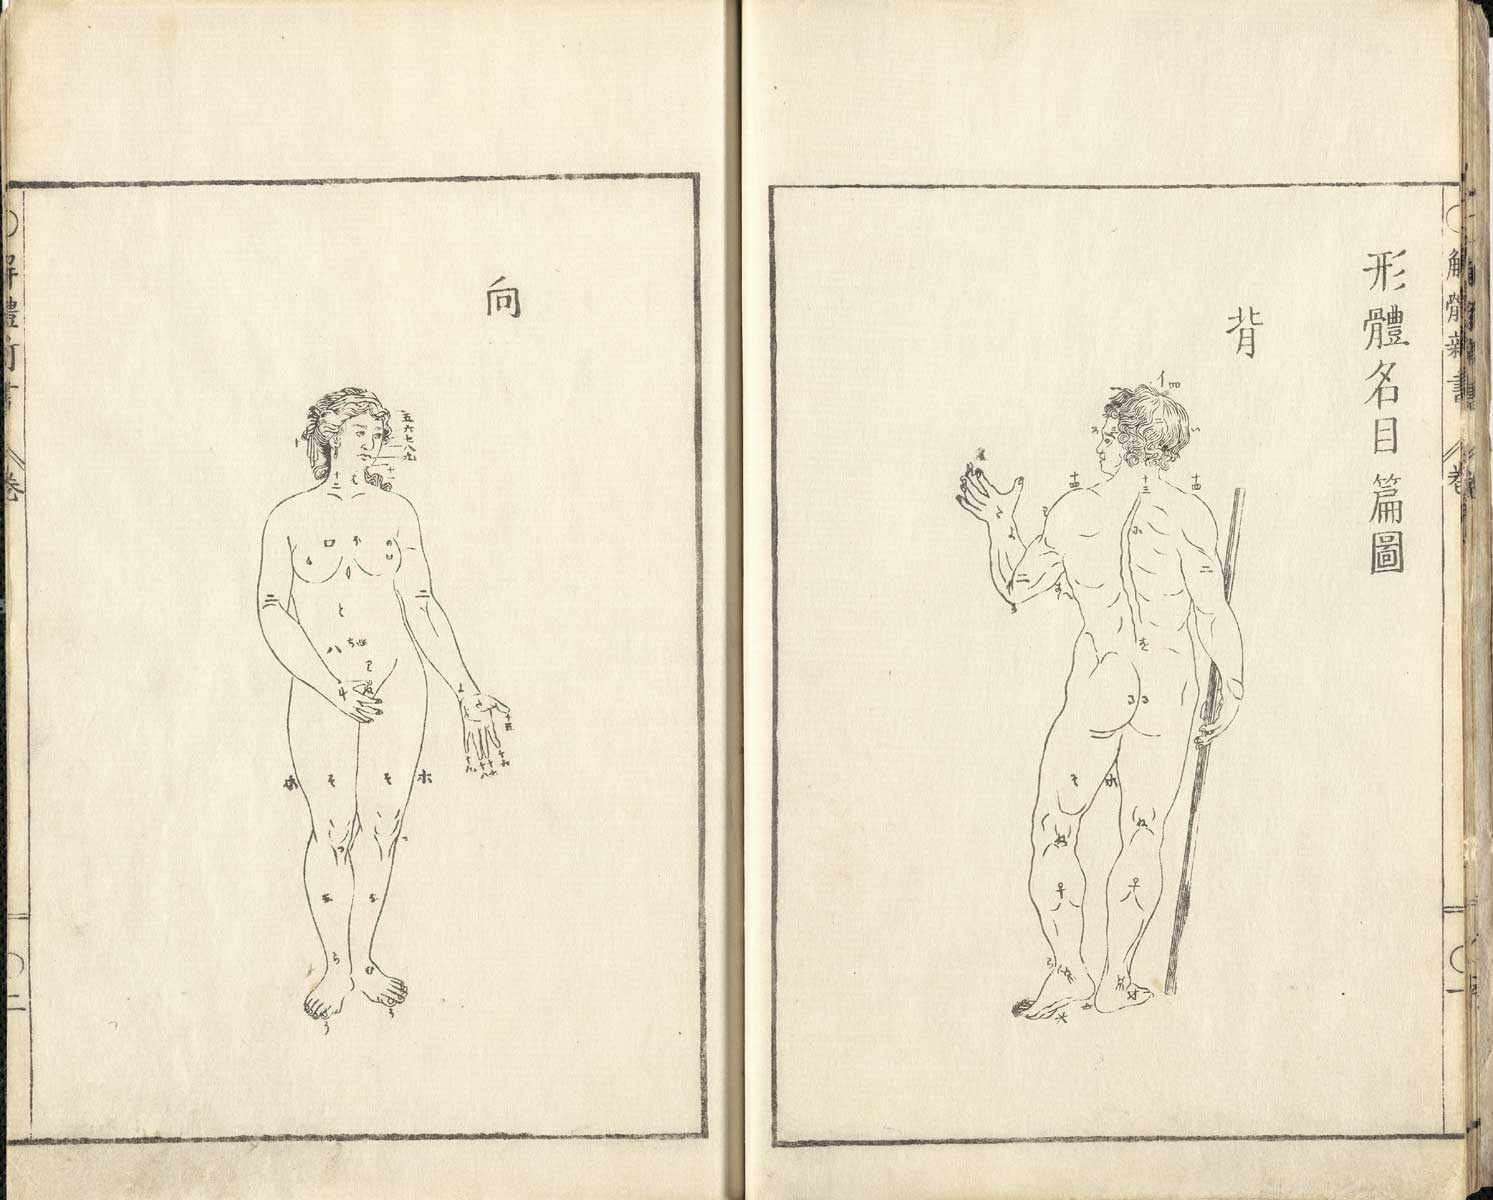 Pages 1 and 2 of Johann Adam Kulmus' Kaitai shinsho, featuring on page 1 the full posterior view of a male figure with its left arm upraised and the right arm holding a staff. On page 2 is the full frontal view of a female figure covering her genitial with her right hand.